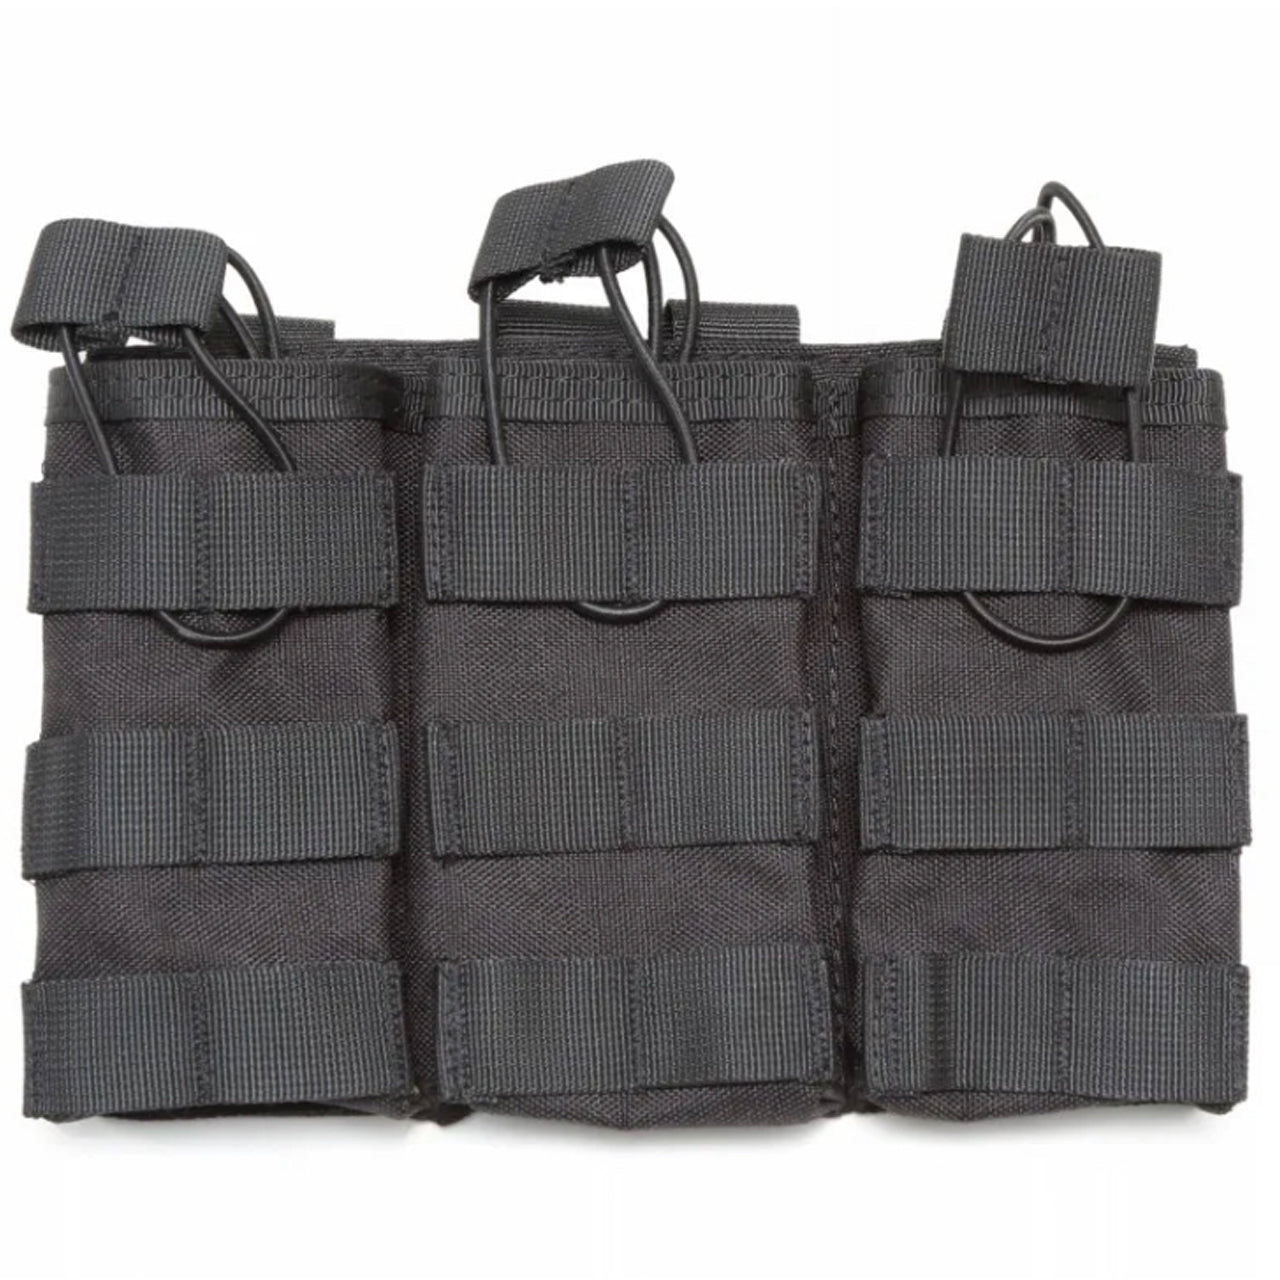 Experience the convenience of the Airsoft Combat Triple Mag Pouch! With a simple open-top design and elastic bungee cord fasteners featuring easy pull tabs, it's hassle-free to carry your magazines. www.defenceqstore.com.au